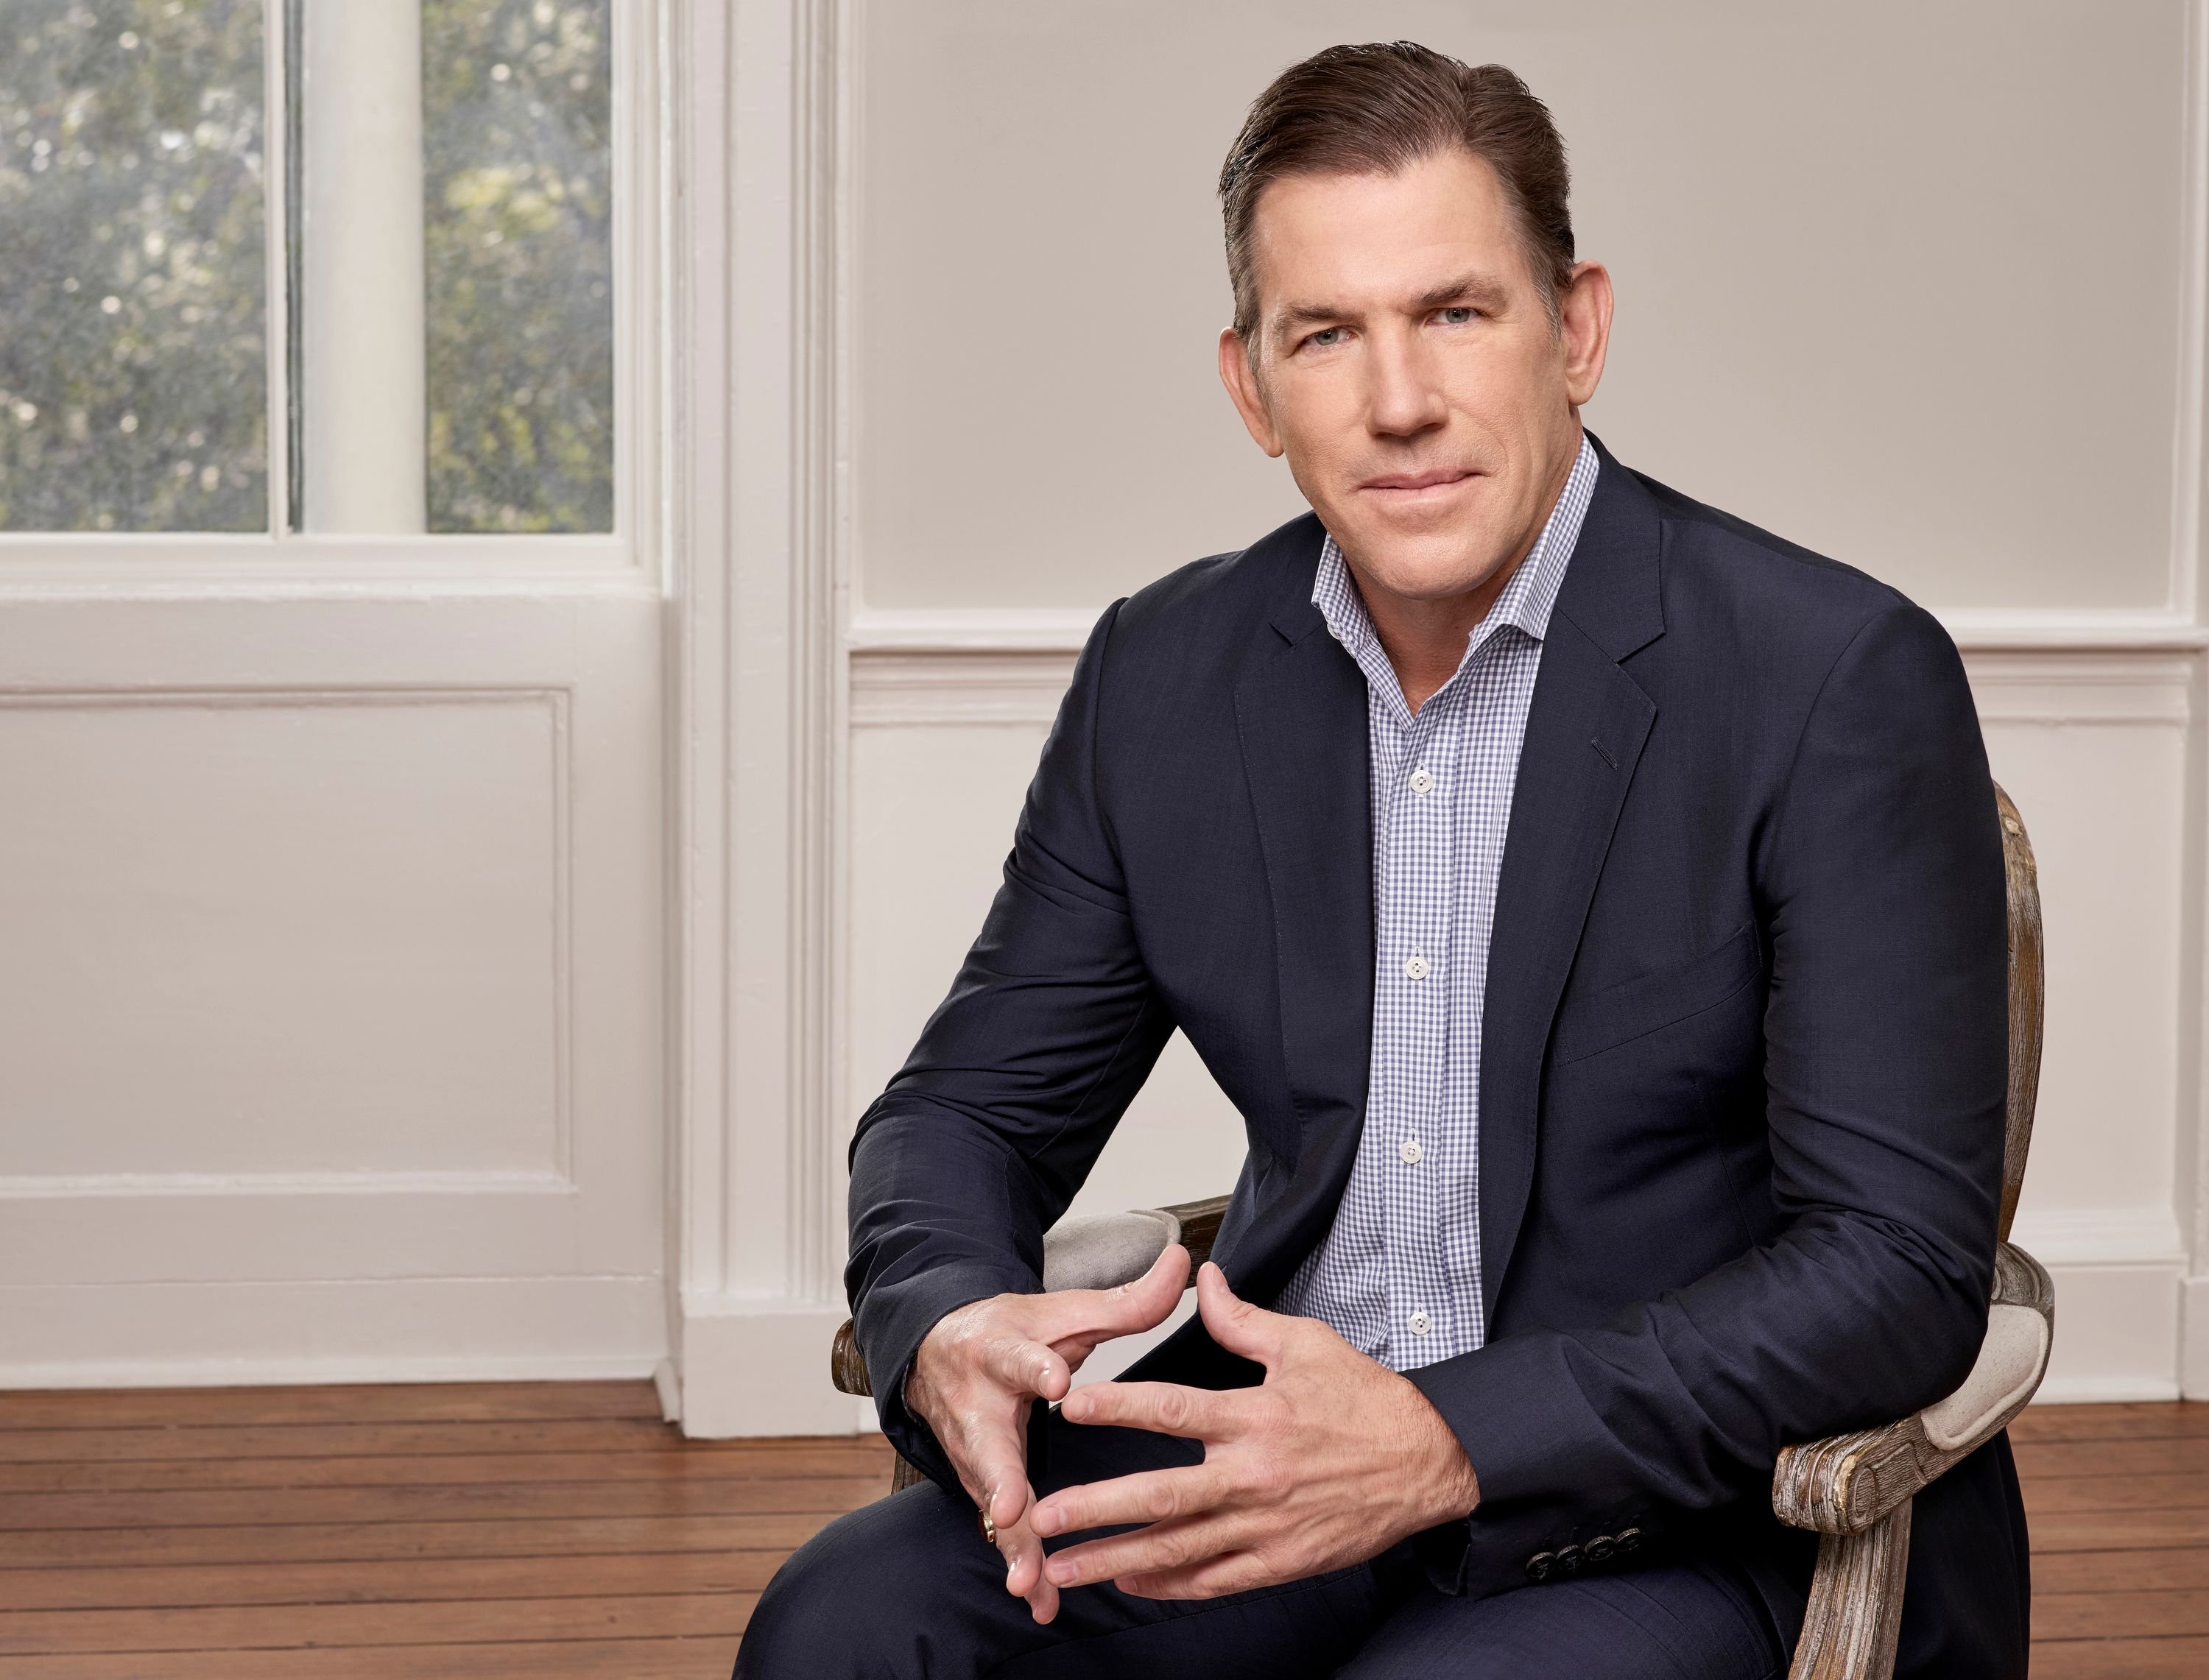 Thomas Ravenel on the set of "Southern Charm" in 2018 | Source: Getty Images